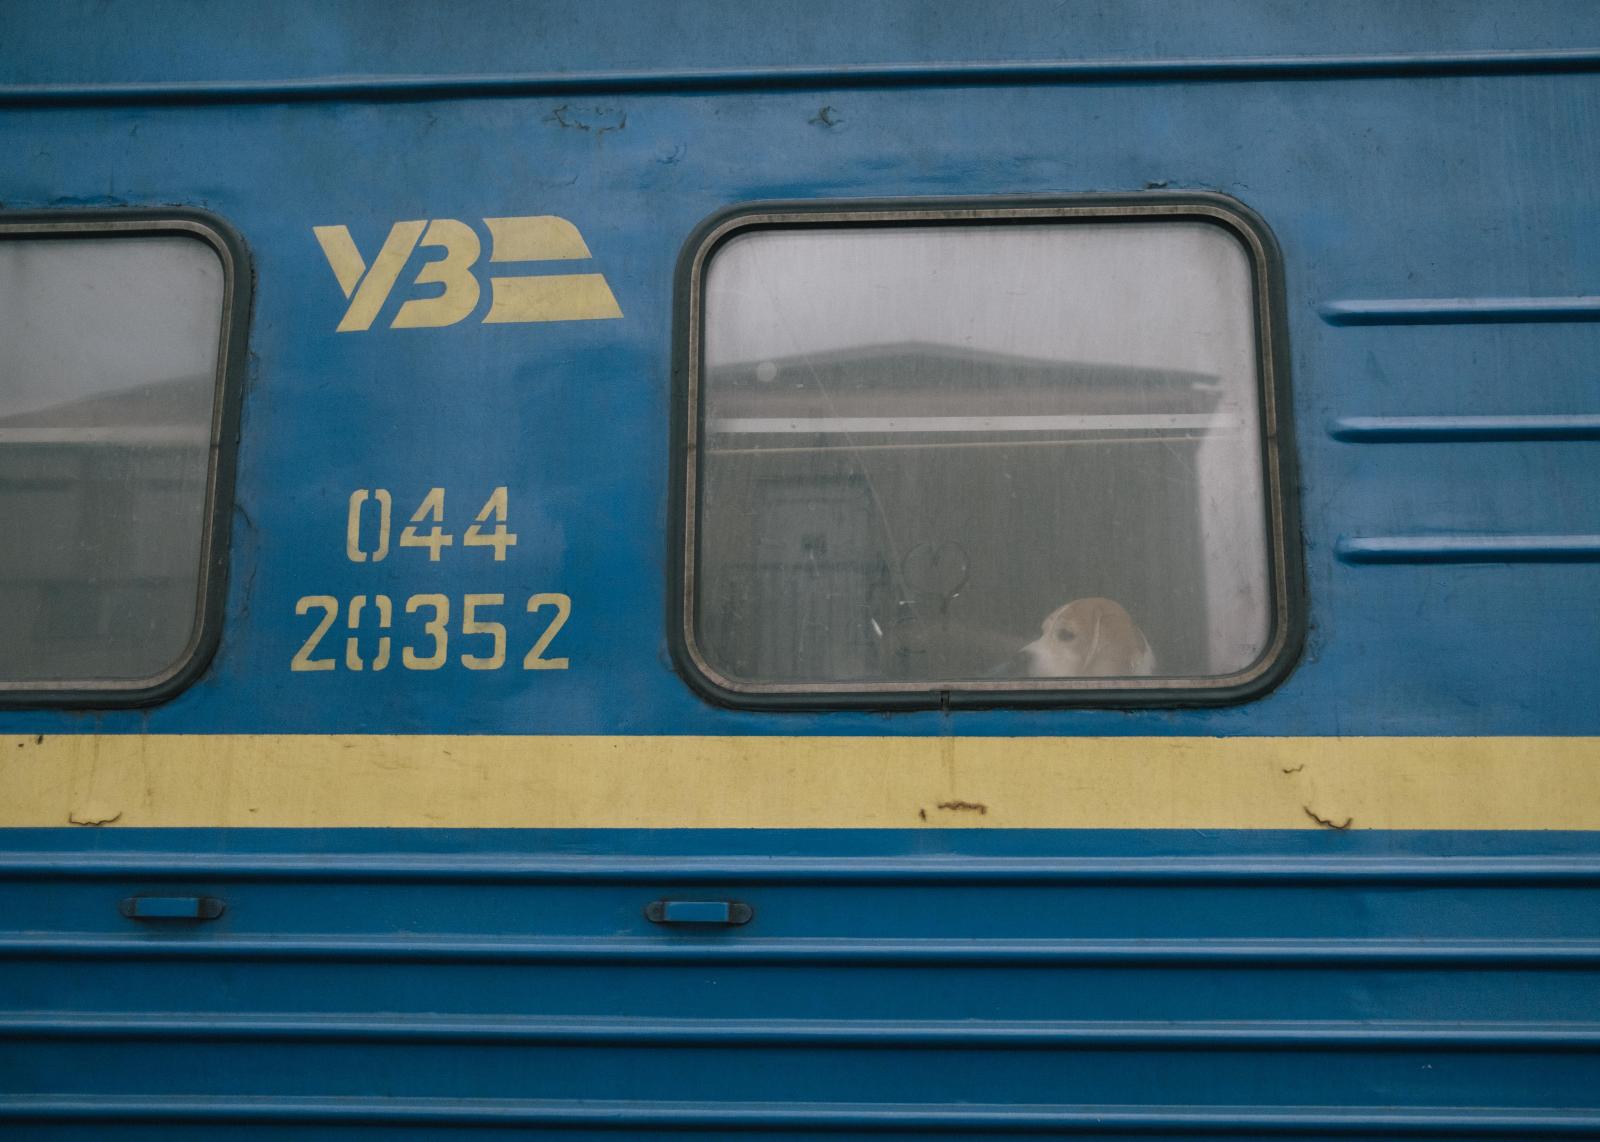 Escaping Putin's Bombs - March 4th, 2022 - Lviv Central Station